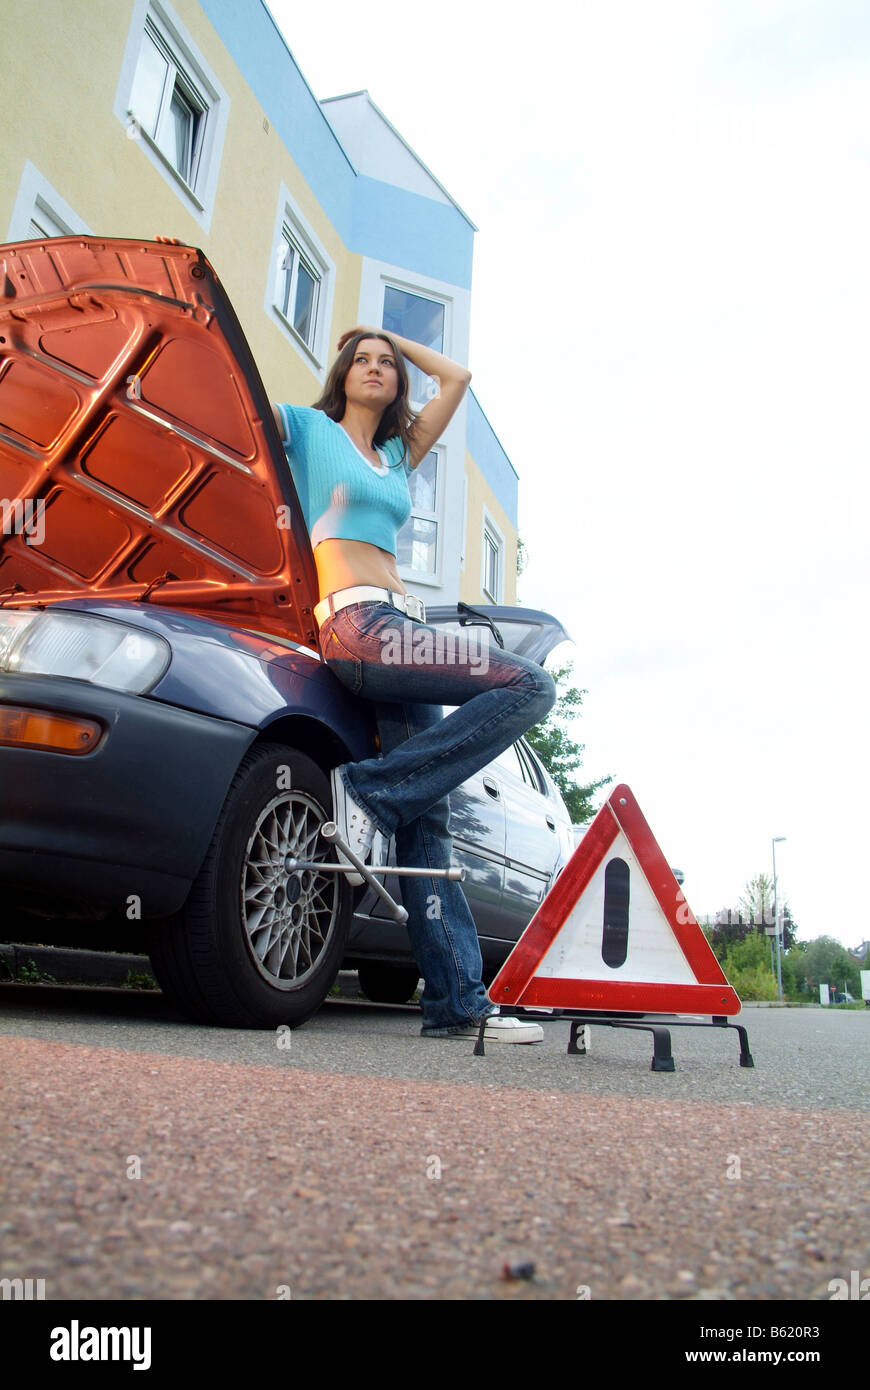 Young woman next to a warning triangle, leaning against her broken down car and waiting for help Stock Photo